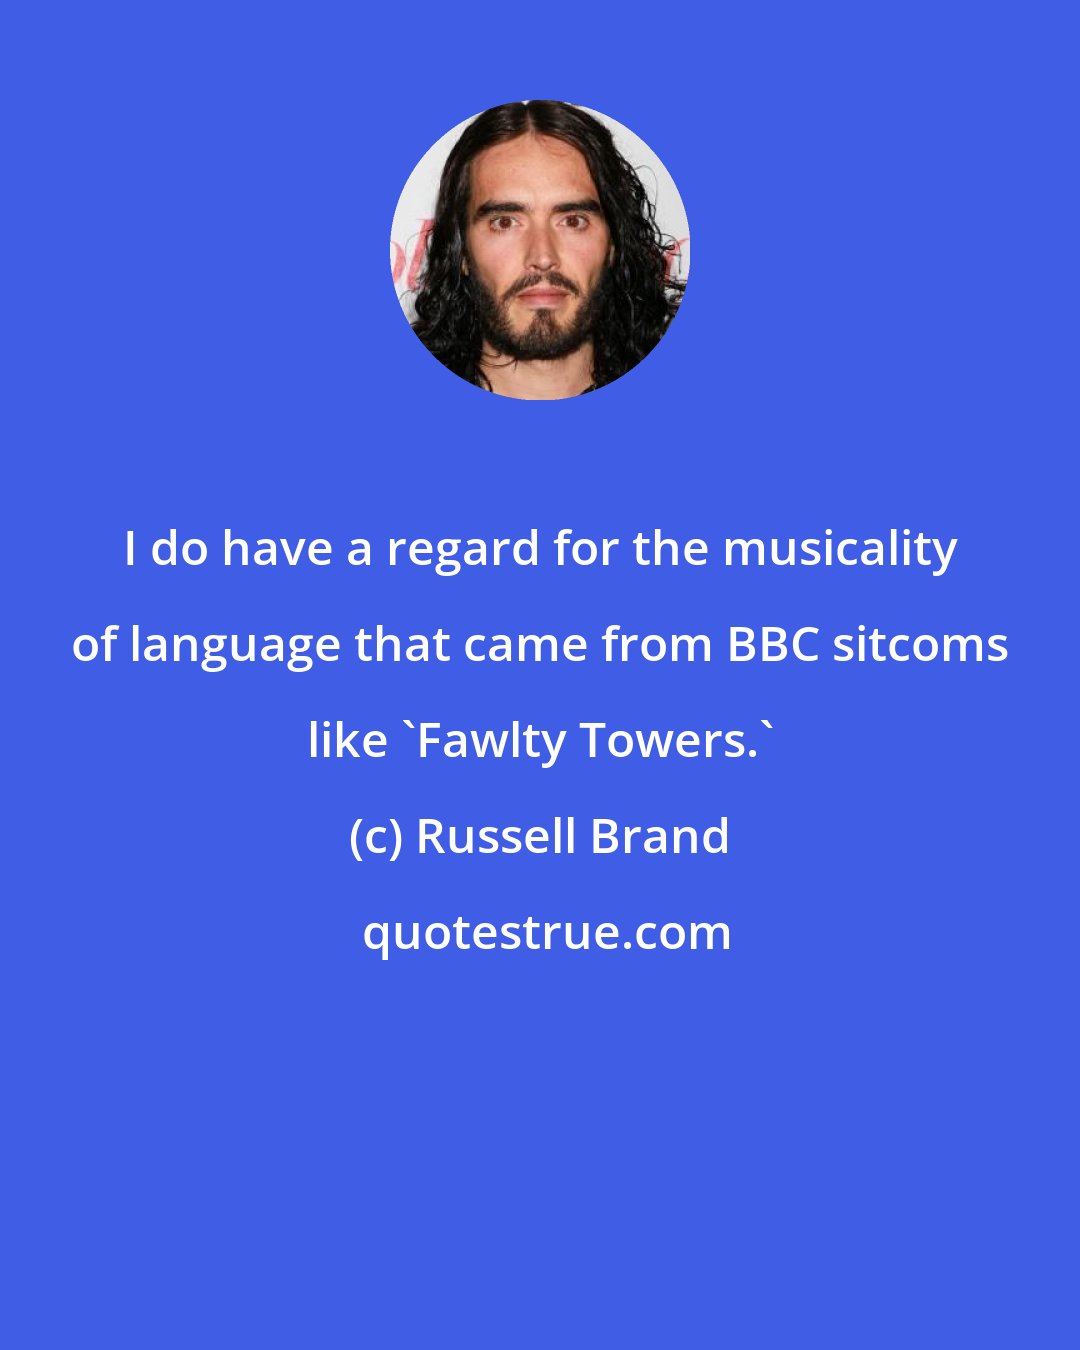 Russell Brand: I do have a regard for the musicality of language that came from BBC sitcoms like 'Fawlty Towers.'